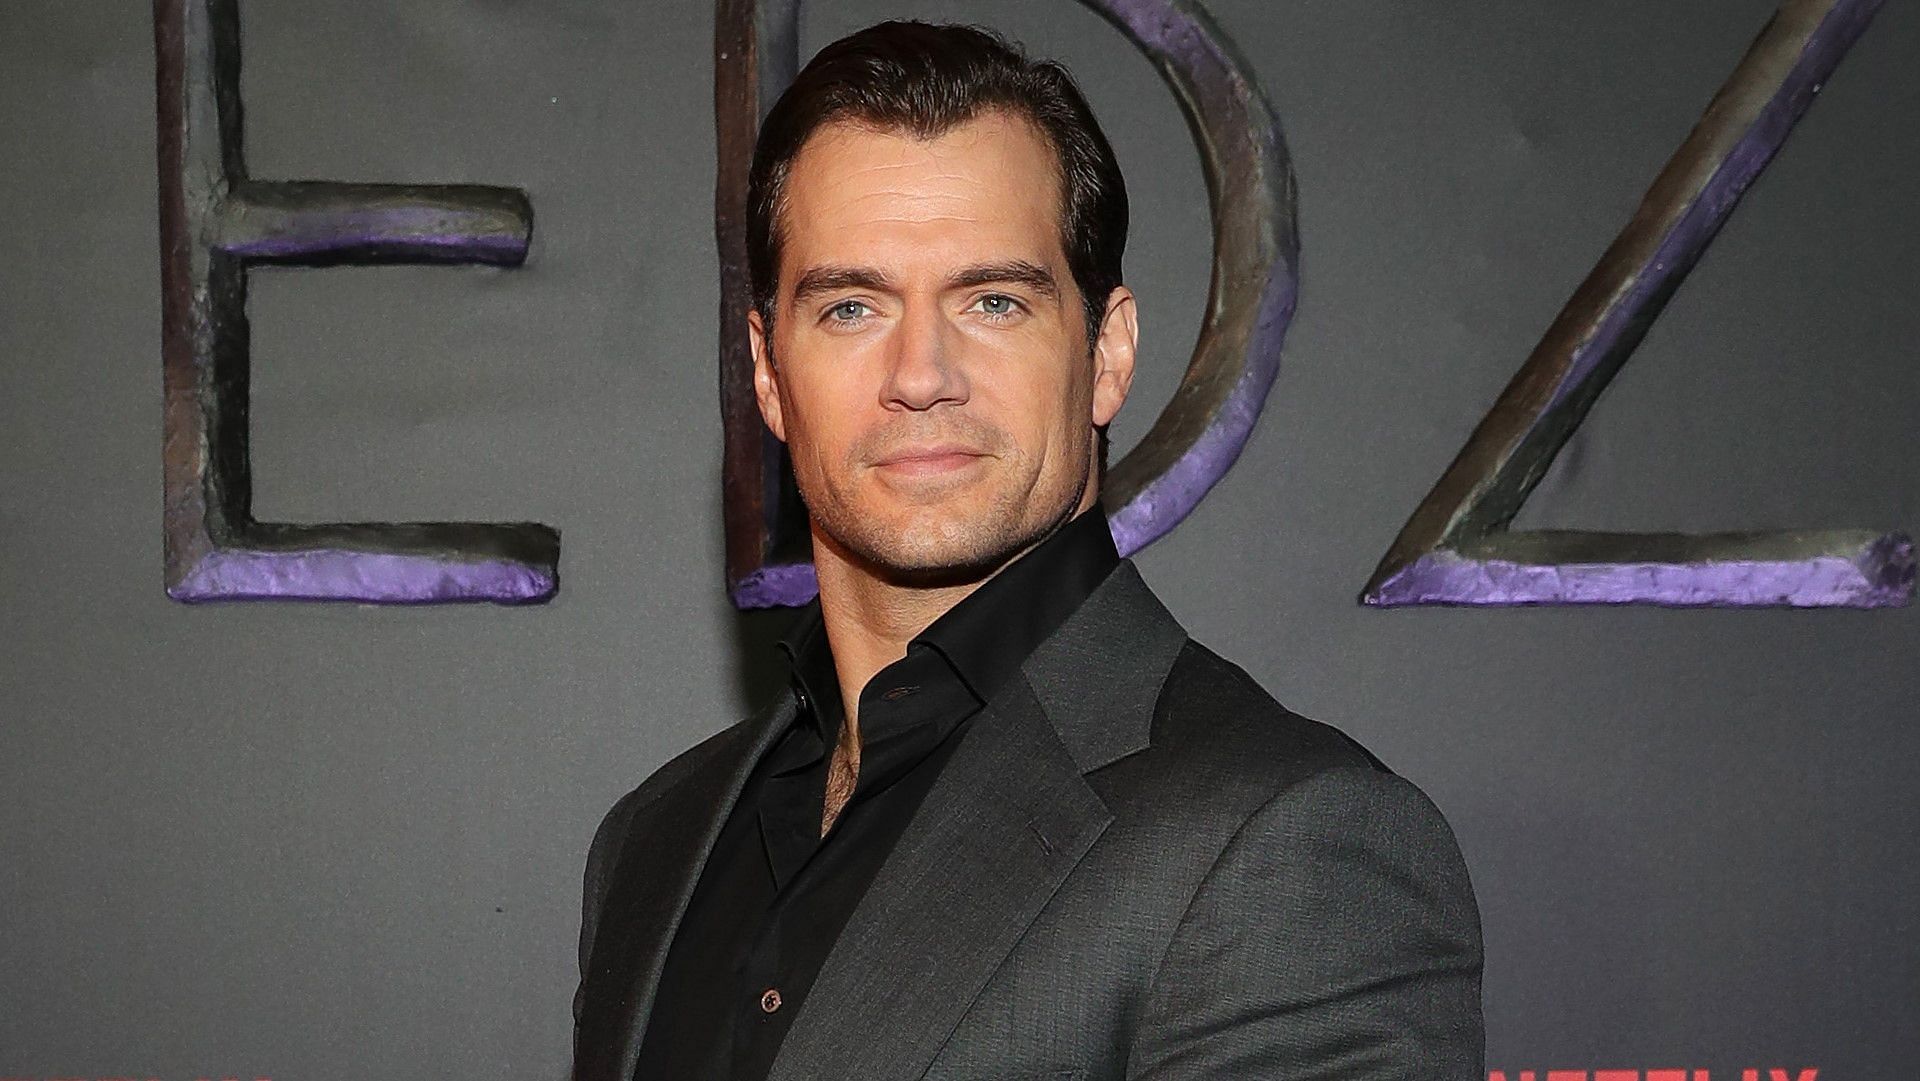 Henry Cavill is renowned for his iconic portrayal of Superman. (Getty Images)